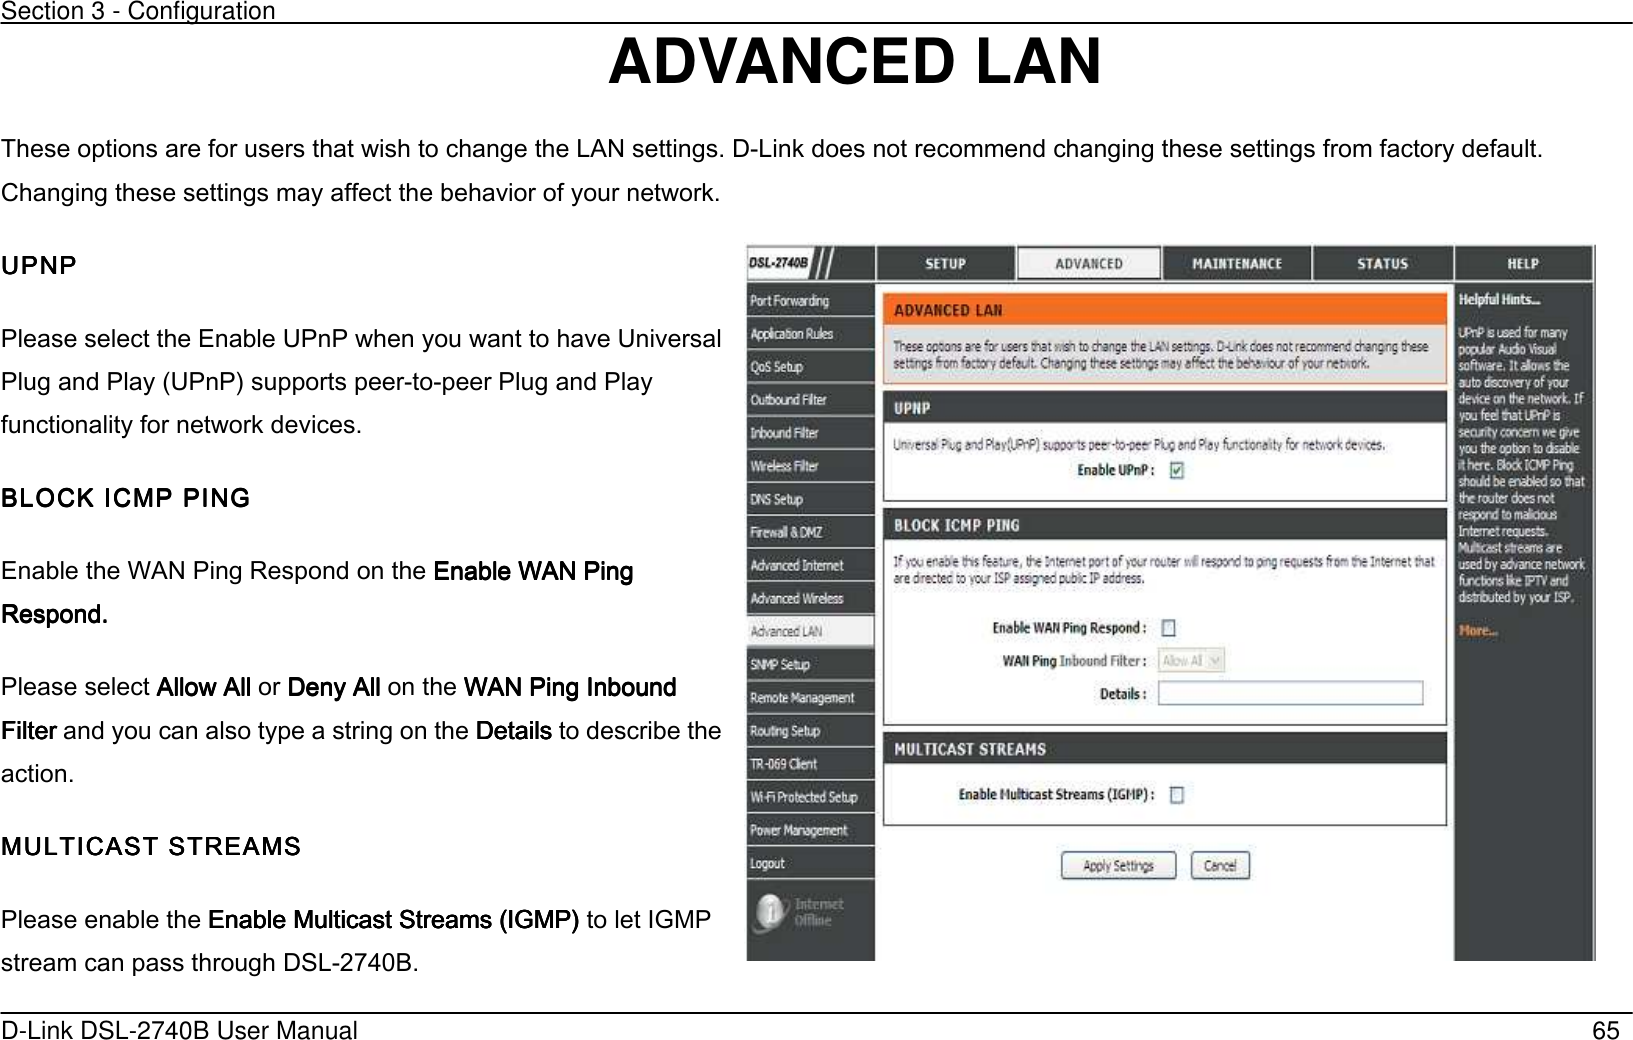 Section 3 - Configuration   D-Link DSL-2740B User Manual                                                  65 ADVANCED LAN These options are for users that wish to change the LAN settings. D-Link does not recommend changing these settings from factory default. Changing these settings may affect the behavior of your network. UPNPUPNPUPNPUPNP Please select the Enable UPnP when you want to have Universal Plug and Play (UPnP’ supports peer-to-peer Plug and Play functionality for network devices. BLOCK ICMP PINGBLOCK ICMP PINGBLOCK ICMP PINGBLOCK ICMP PING    Enable the WAN Ping Respond on the Enable WAN Ping Enable WAN Ping Enable WAN Ping Enable WAN Ping RespondRespondRespondRespond....         Please select Allow AllAllow AllAllow AllAllow All or Deny AllDeny AllDeny AllDeny All    on the WAN Ping Inbound WAN Ping Inbound WAN Ping Inbound WAN Ping Inbound FilterFilterFilterFilter    and you can also type a string on the Details Details Details Details to describe the action.    MULTICAST STREAMSMULTICAST STREAMSMULTICAST STREAMSMULTICAST STREAMS    Please enable the Enable Multicast Streams (IGMP’Enable Multicast Streams (IGMP’Enable Multicast Streams (IGMP’Enable Multicast Streams (IGMP’    to let IGMP stream can pass through DSL-2740B.     